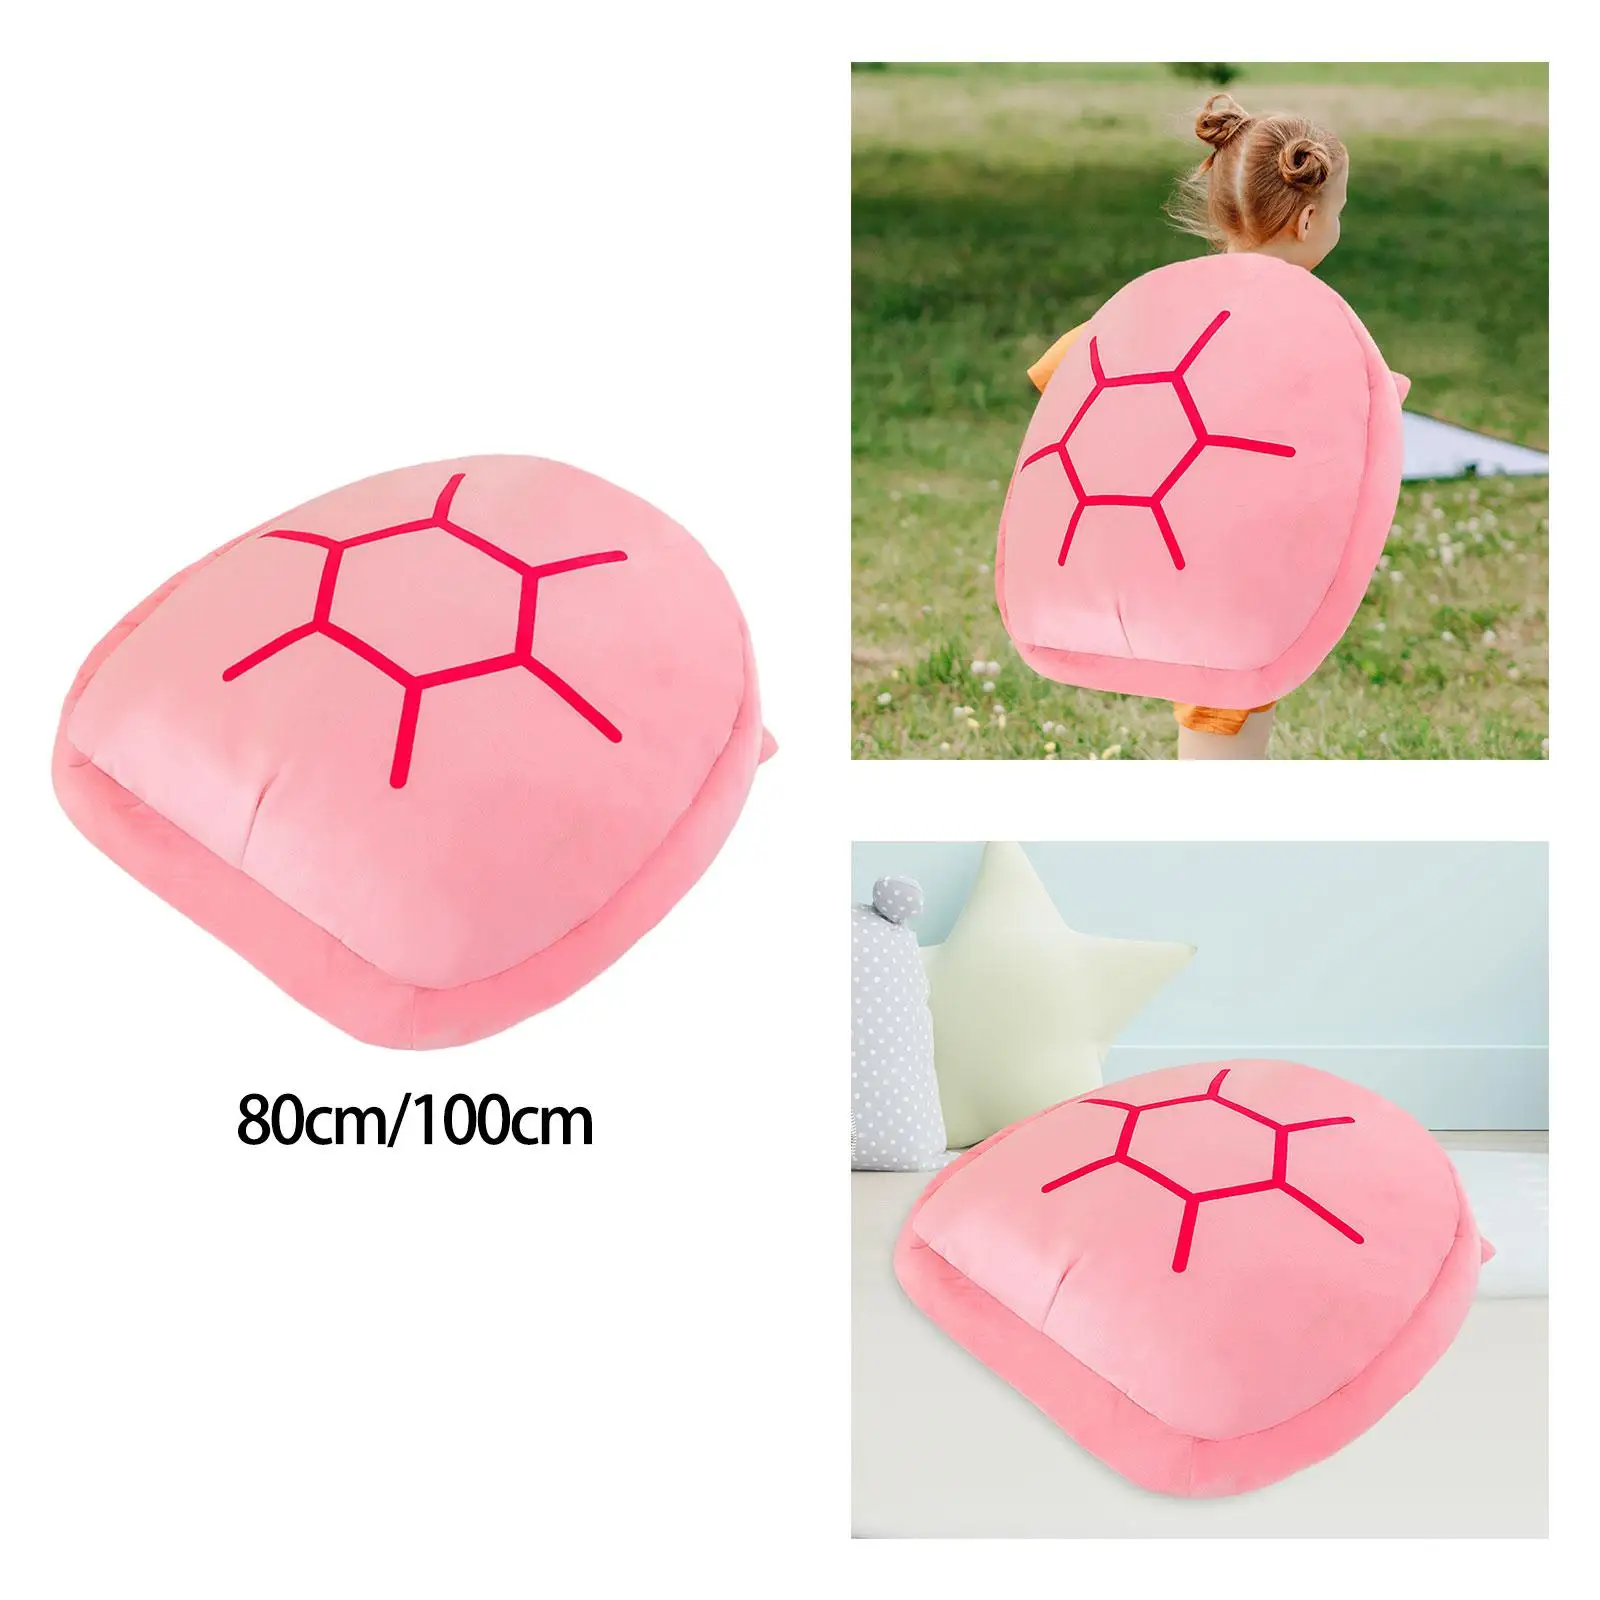 Funny Wearable Turtle Shell Pillow Sleeping Cushion Fancy Dress Tortoise Clothes Stuffed Toy Stuffed Animal for Game Gift